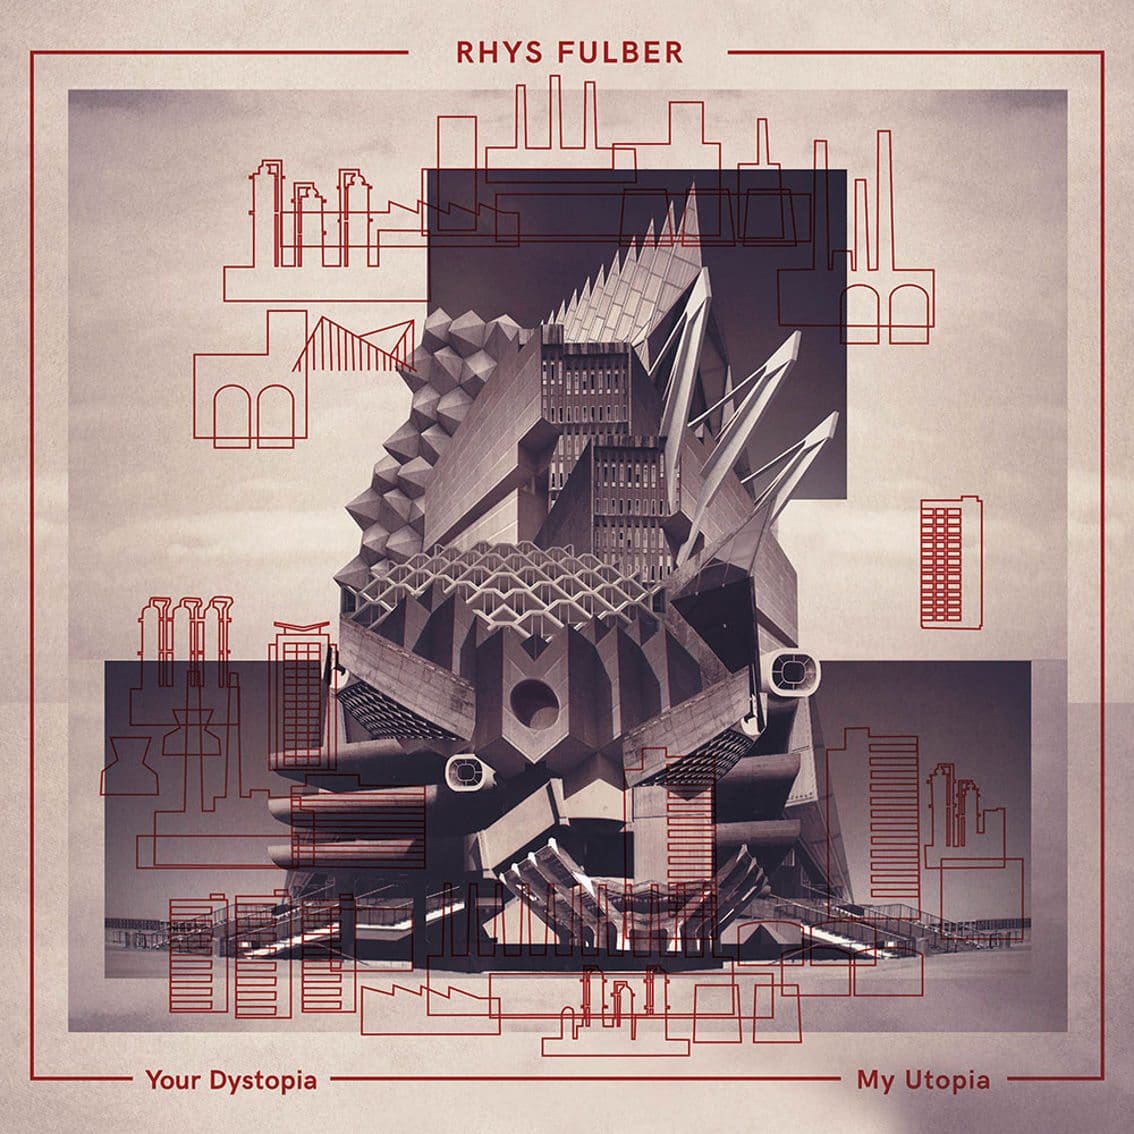 New Rhys Fulber studio album out on June 6th combining dance and EBM